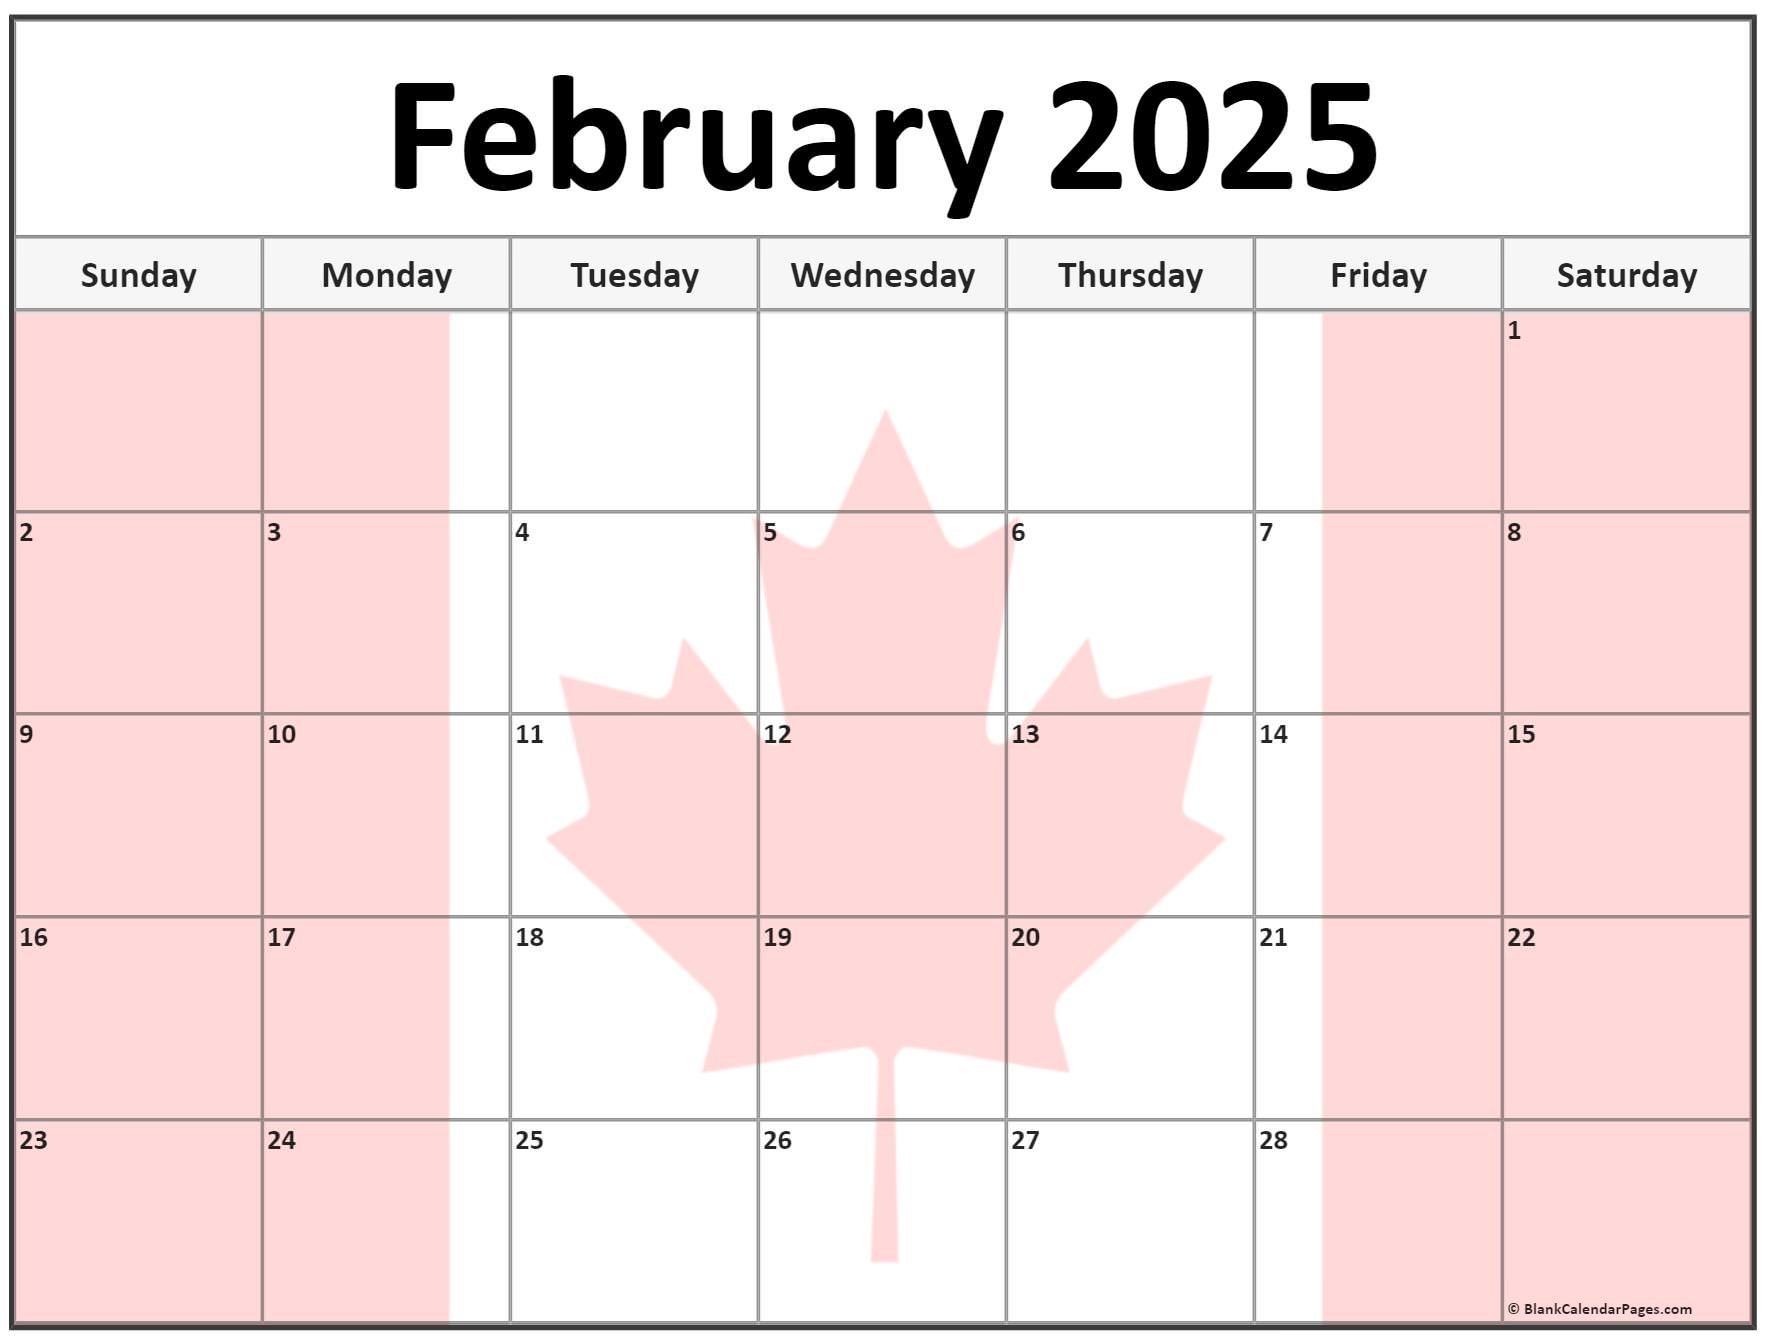 Collection of February 2025 photo calendars with image filters.